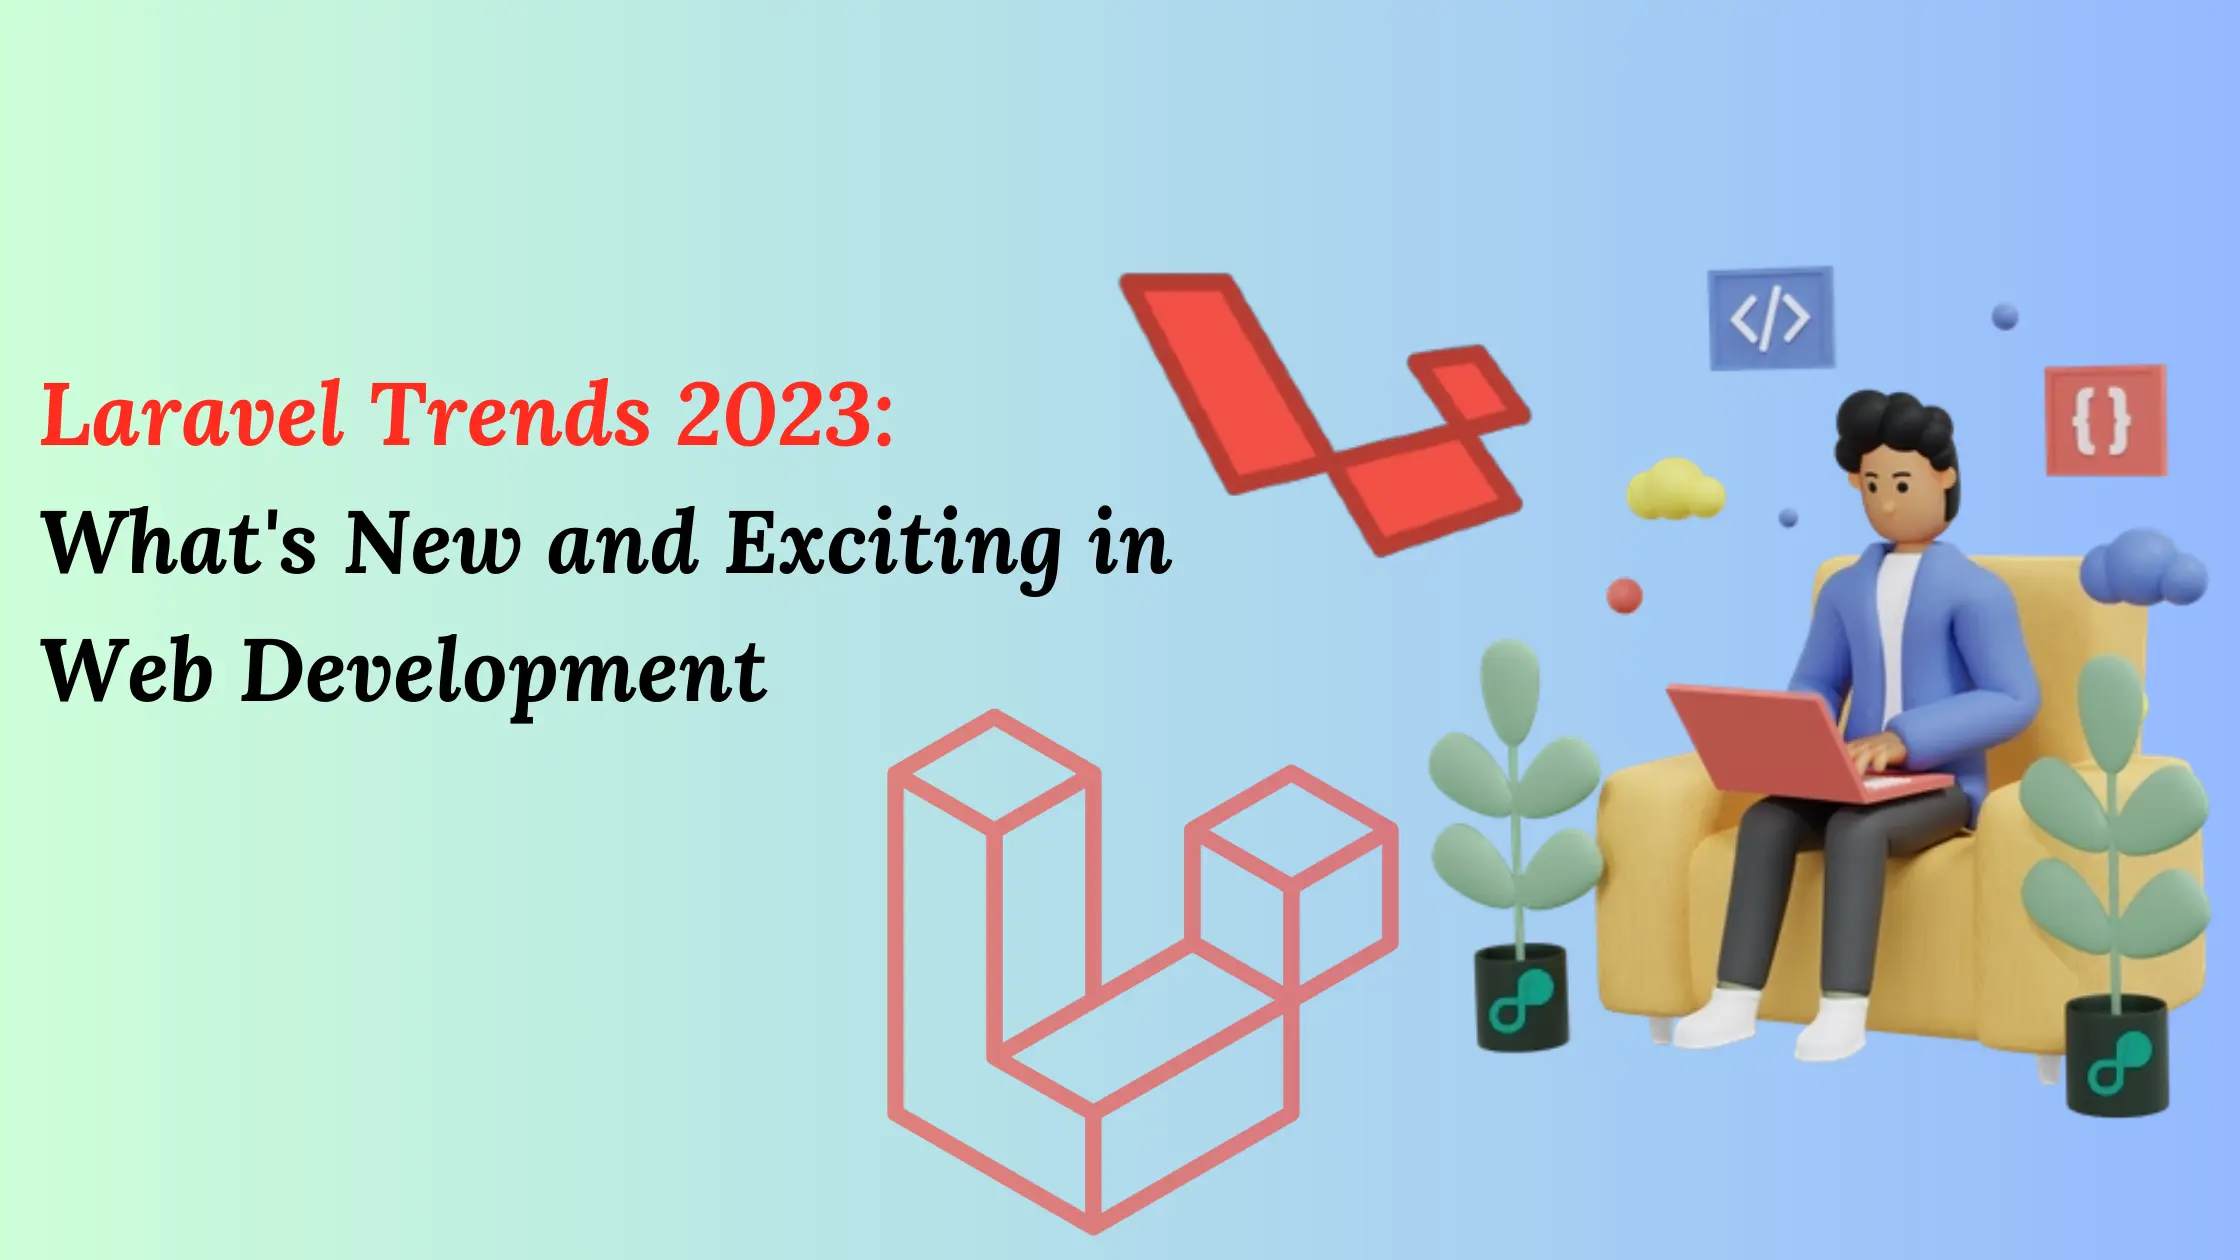 Laravel Trends 2023: What’s New and Exciting in Web Development